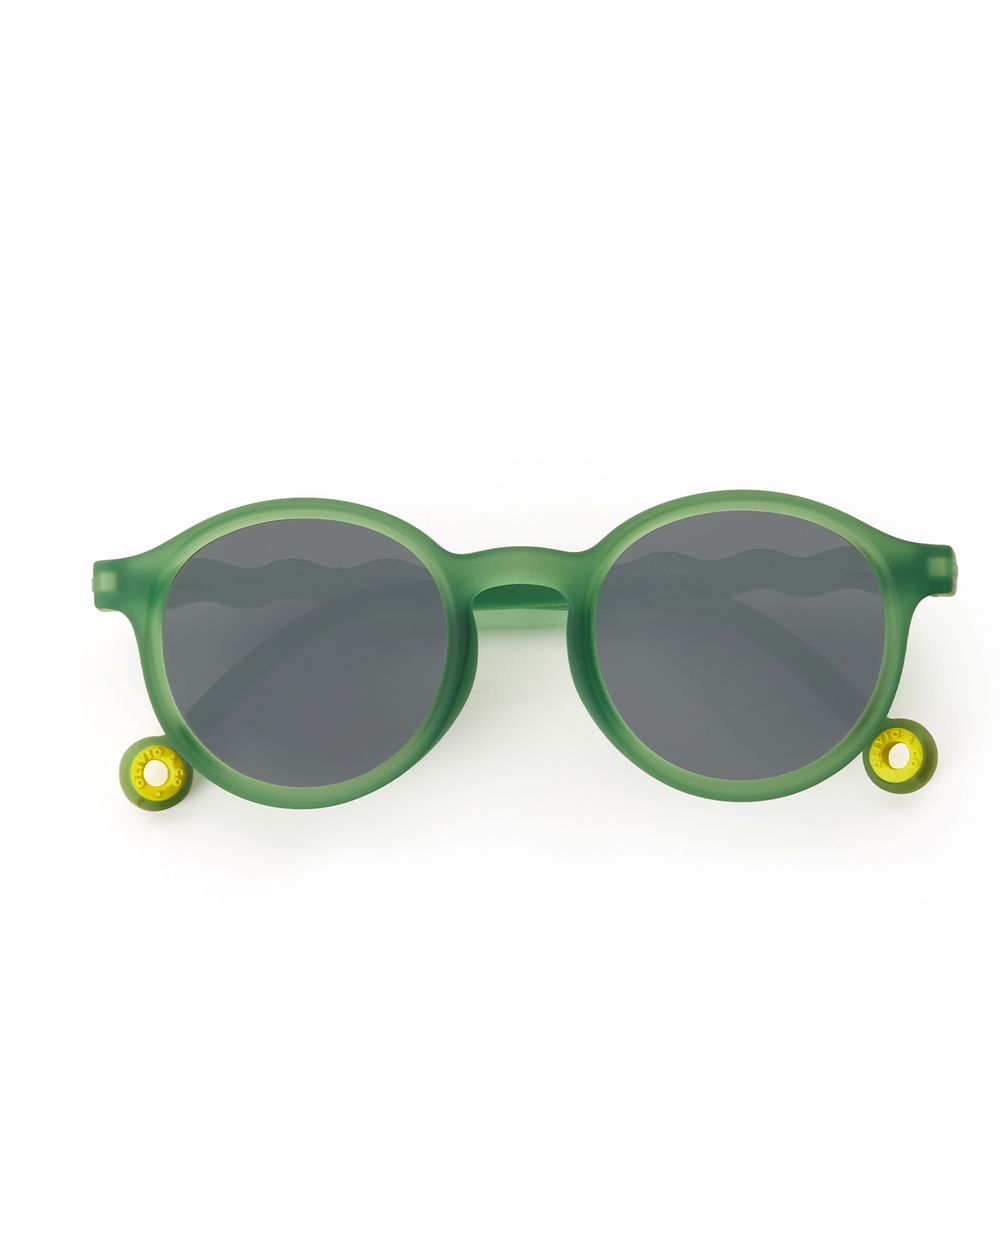 Junio Oval Sunglasses Olive Green with Polarized